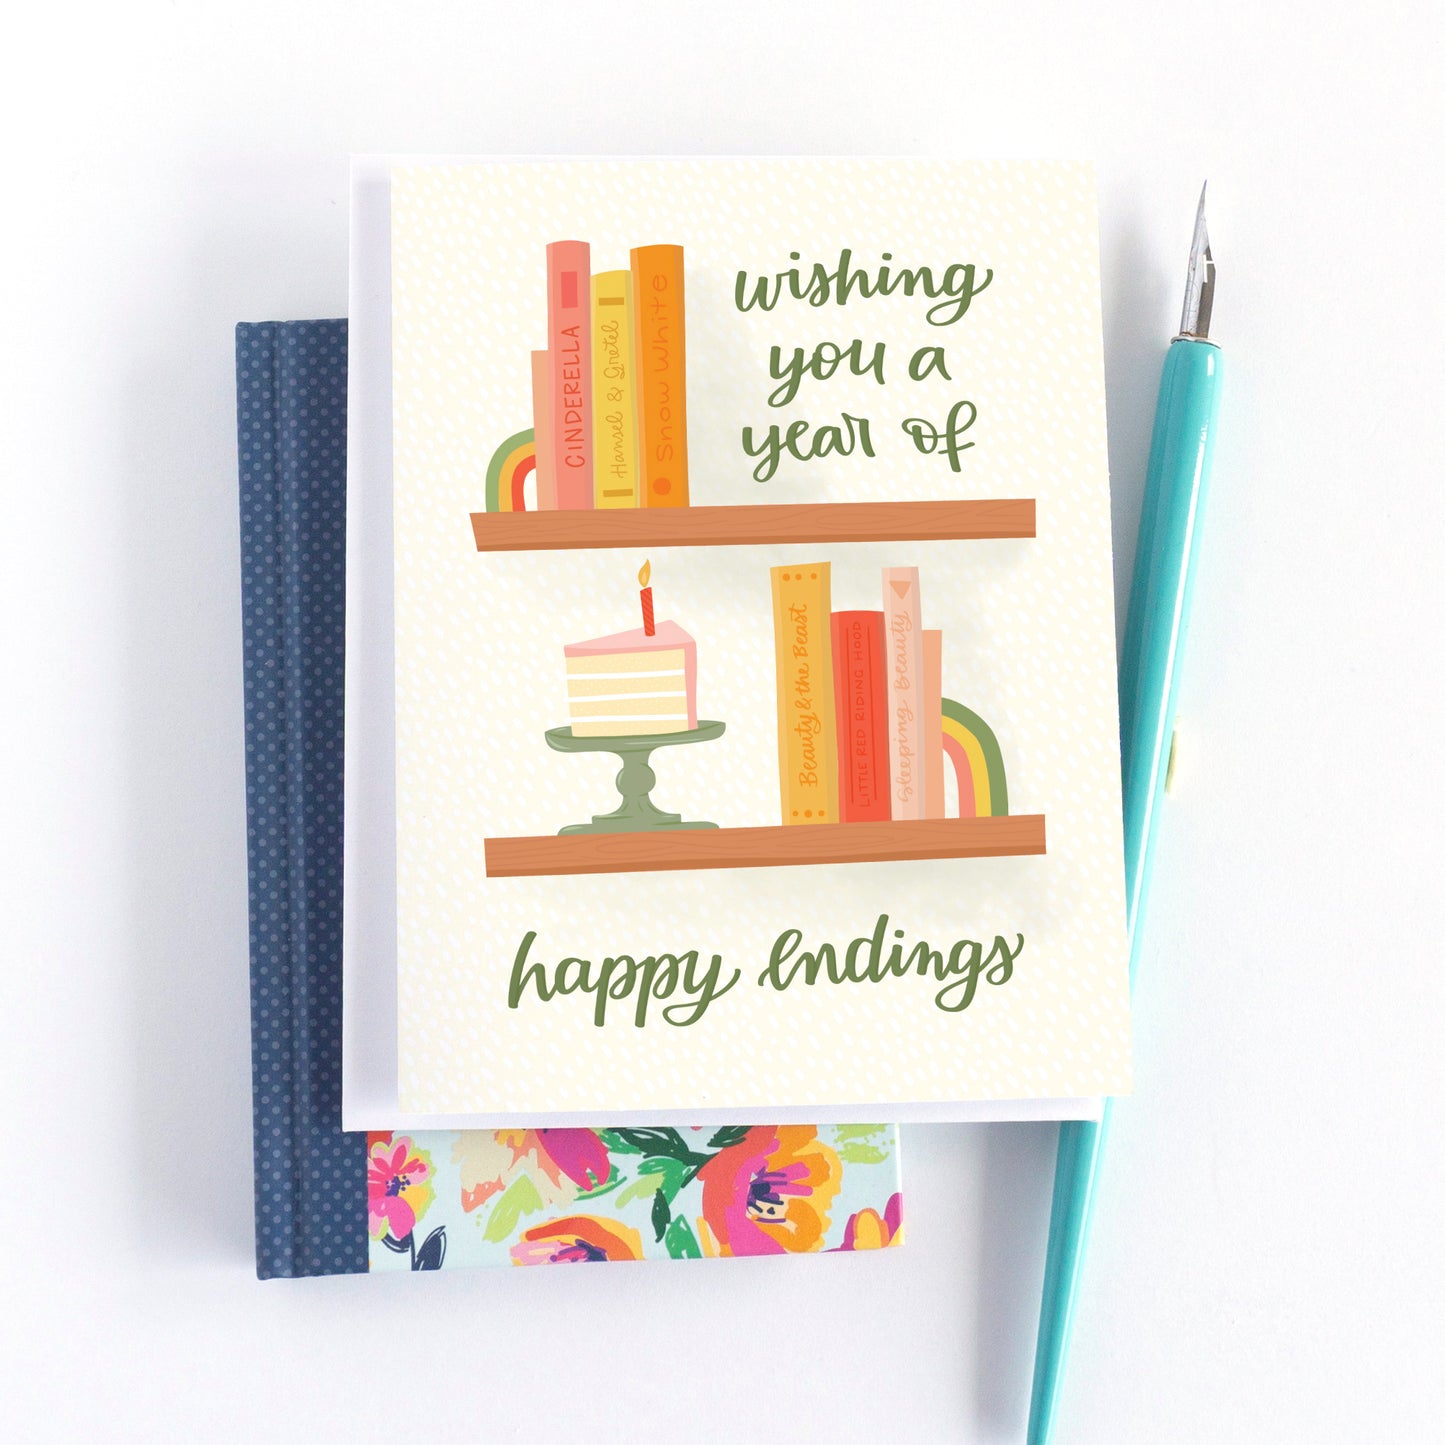 Wishing you a year of happy endings Books Lover Birthday Card